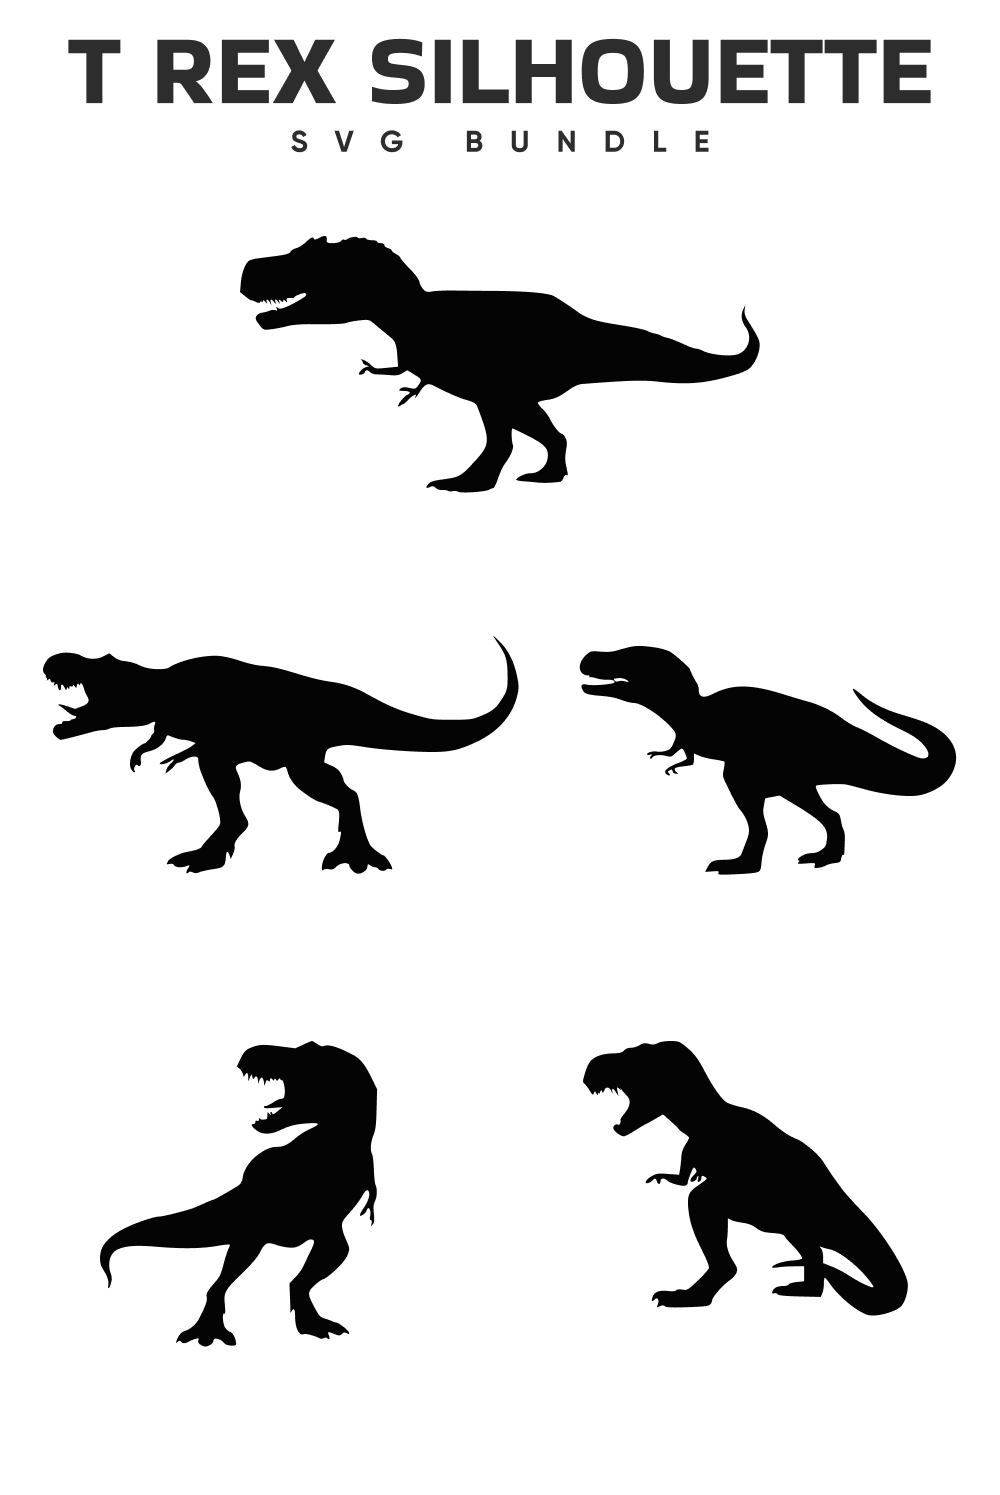 Black t rex silhouette collection.